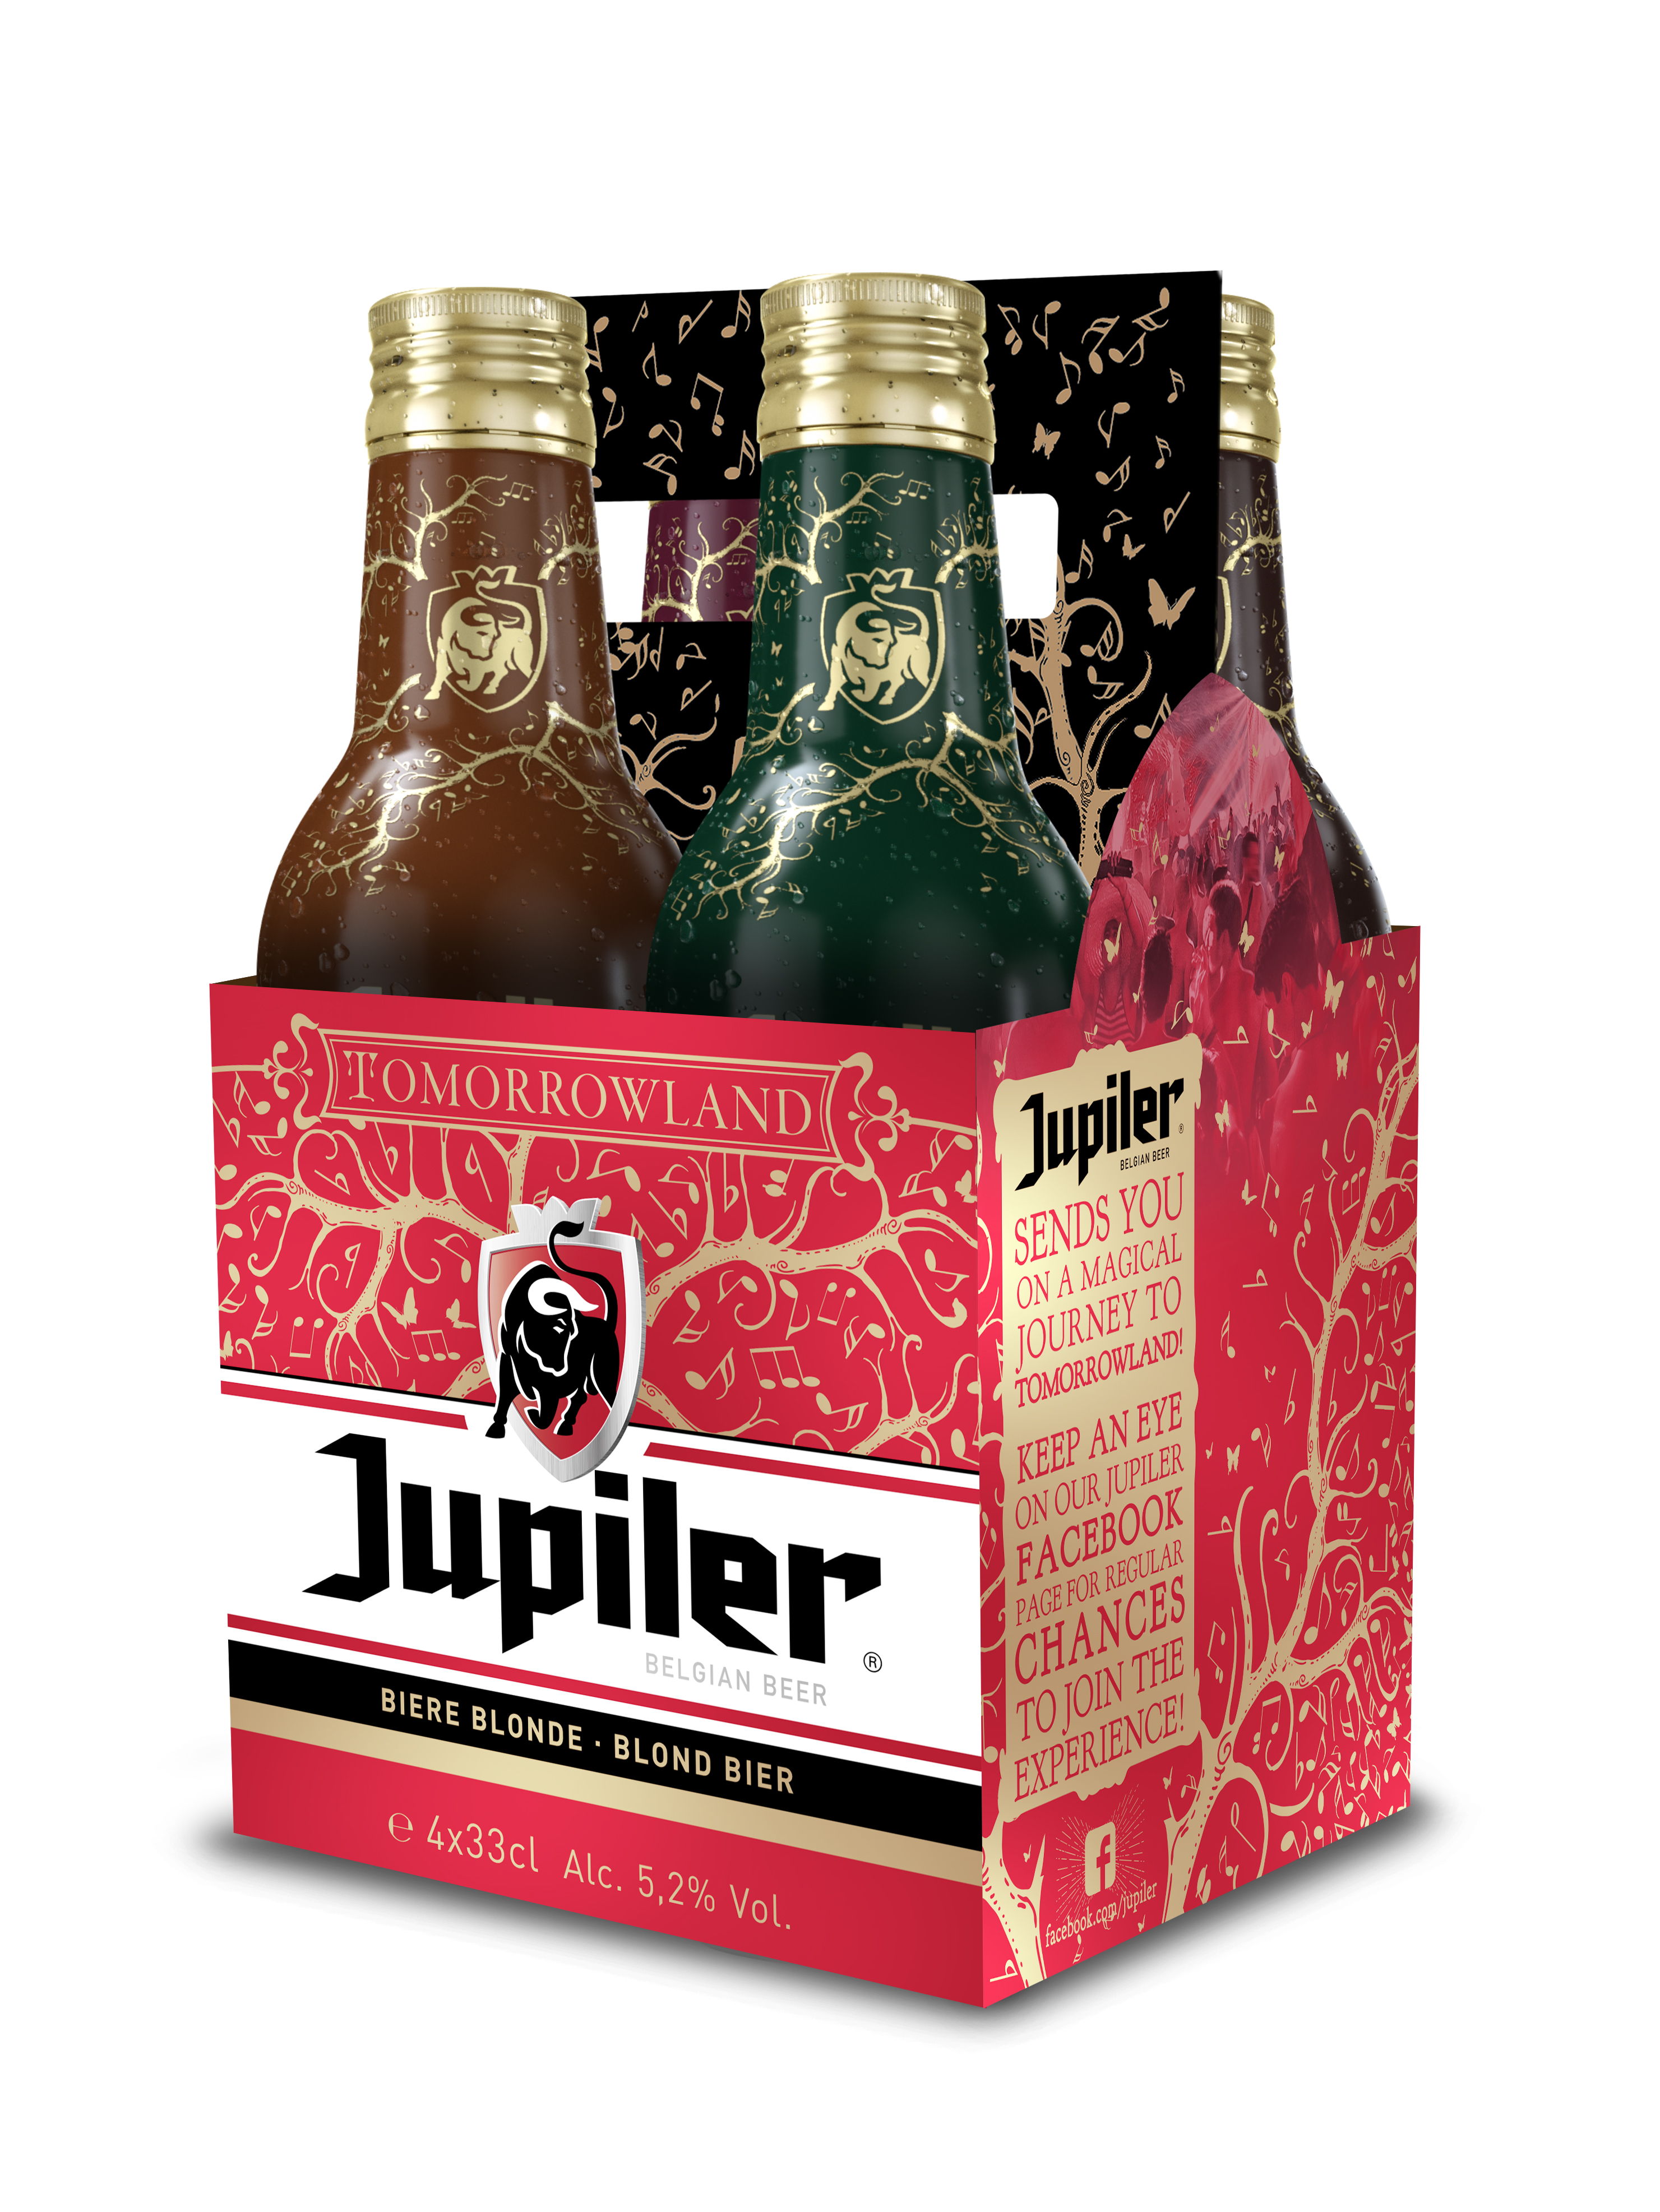 Jupiler features electronic music genres at Tomorrowland